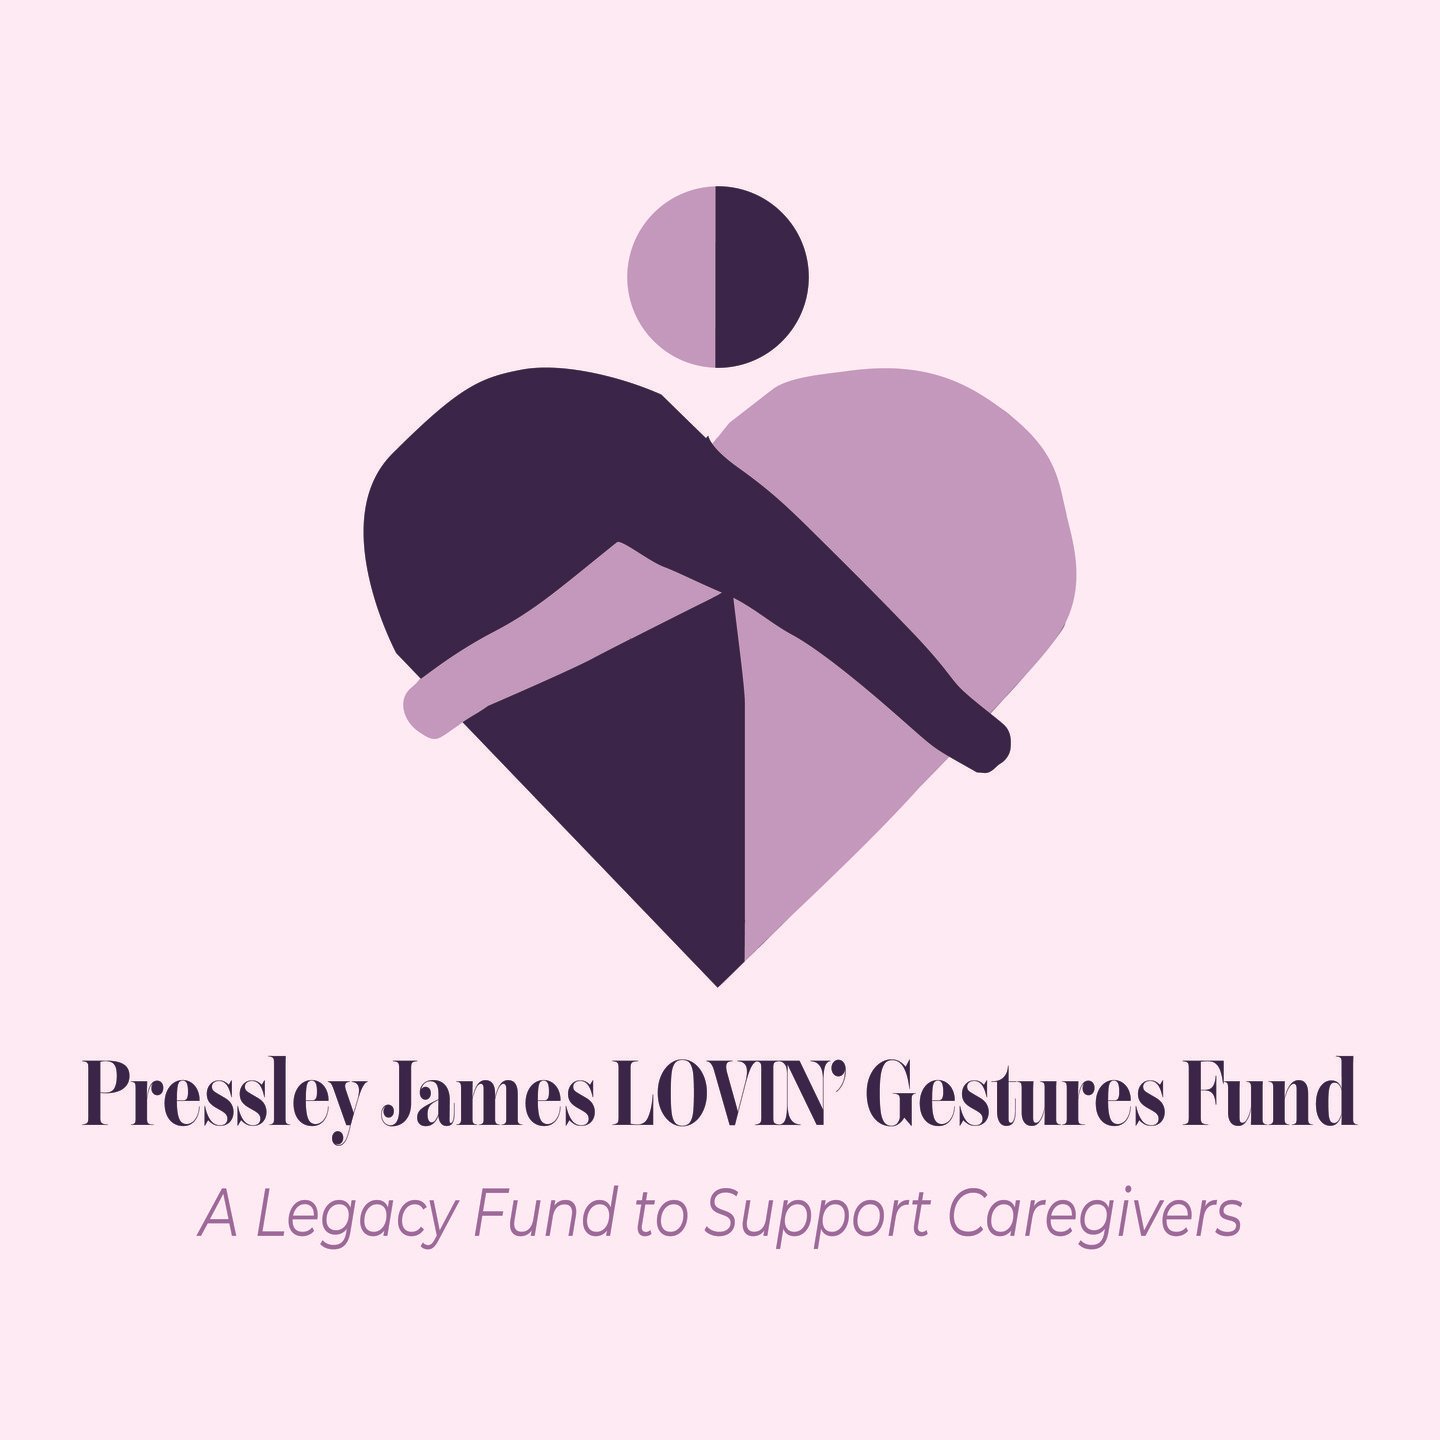 Mother&rsquo;s Day is a celebration of family legacy. We are proud to support two Philanthropists to honor the legacies of their mothers. We are honored to announce the Pressley James Lovin' Gestures Fund created by their daughters Denella Clark and 